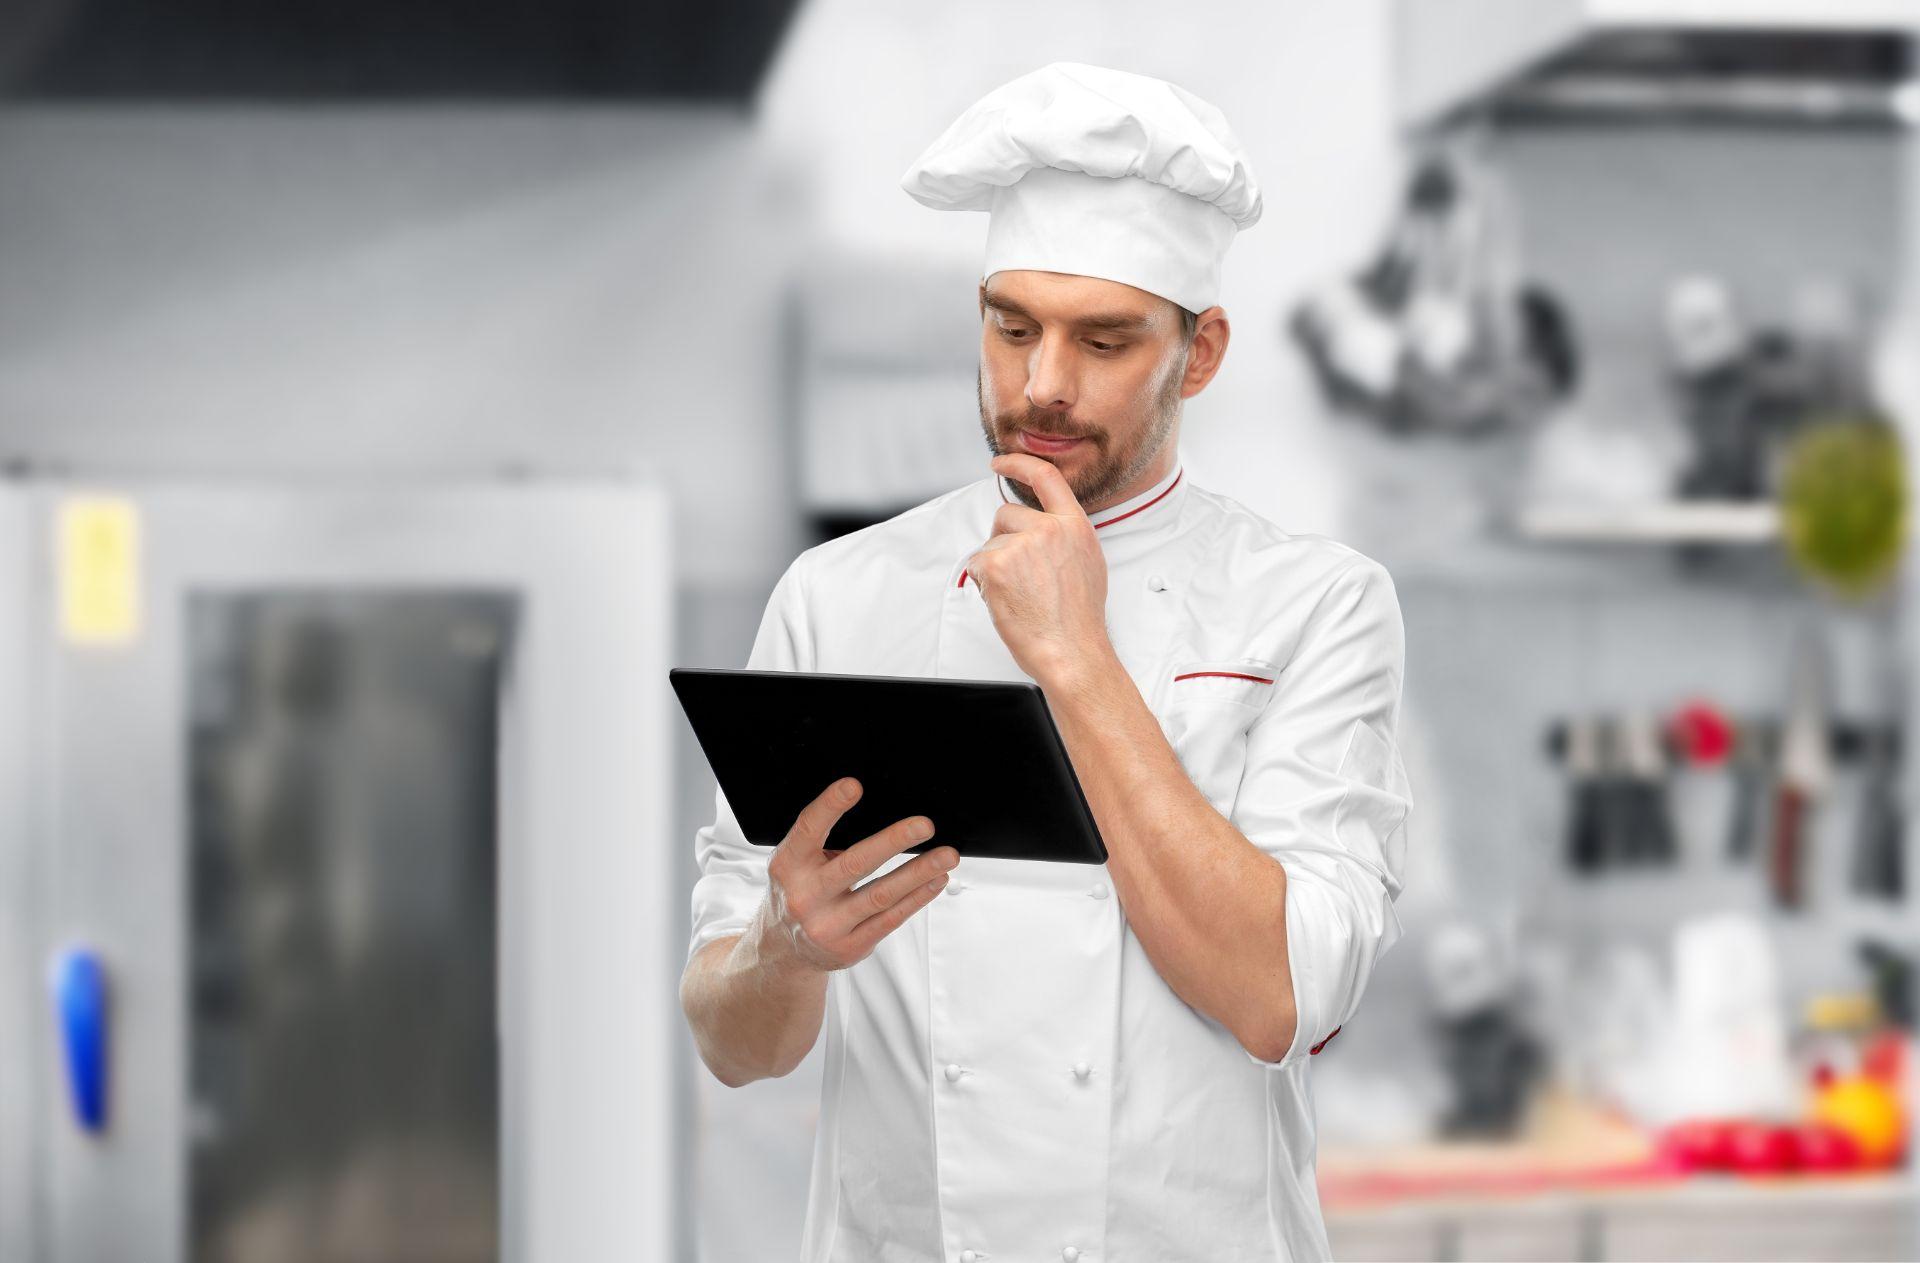 chef looking at tablet